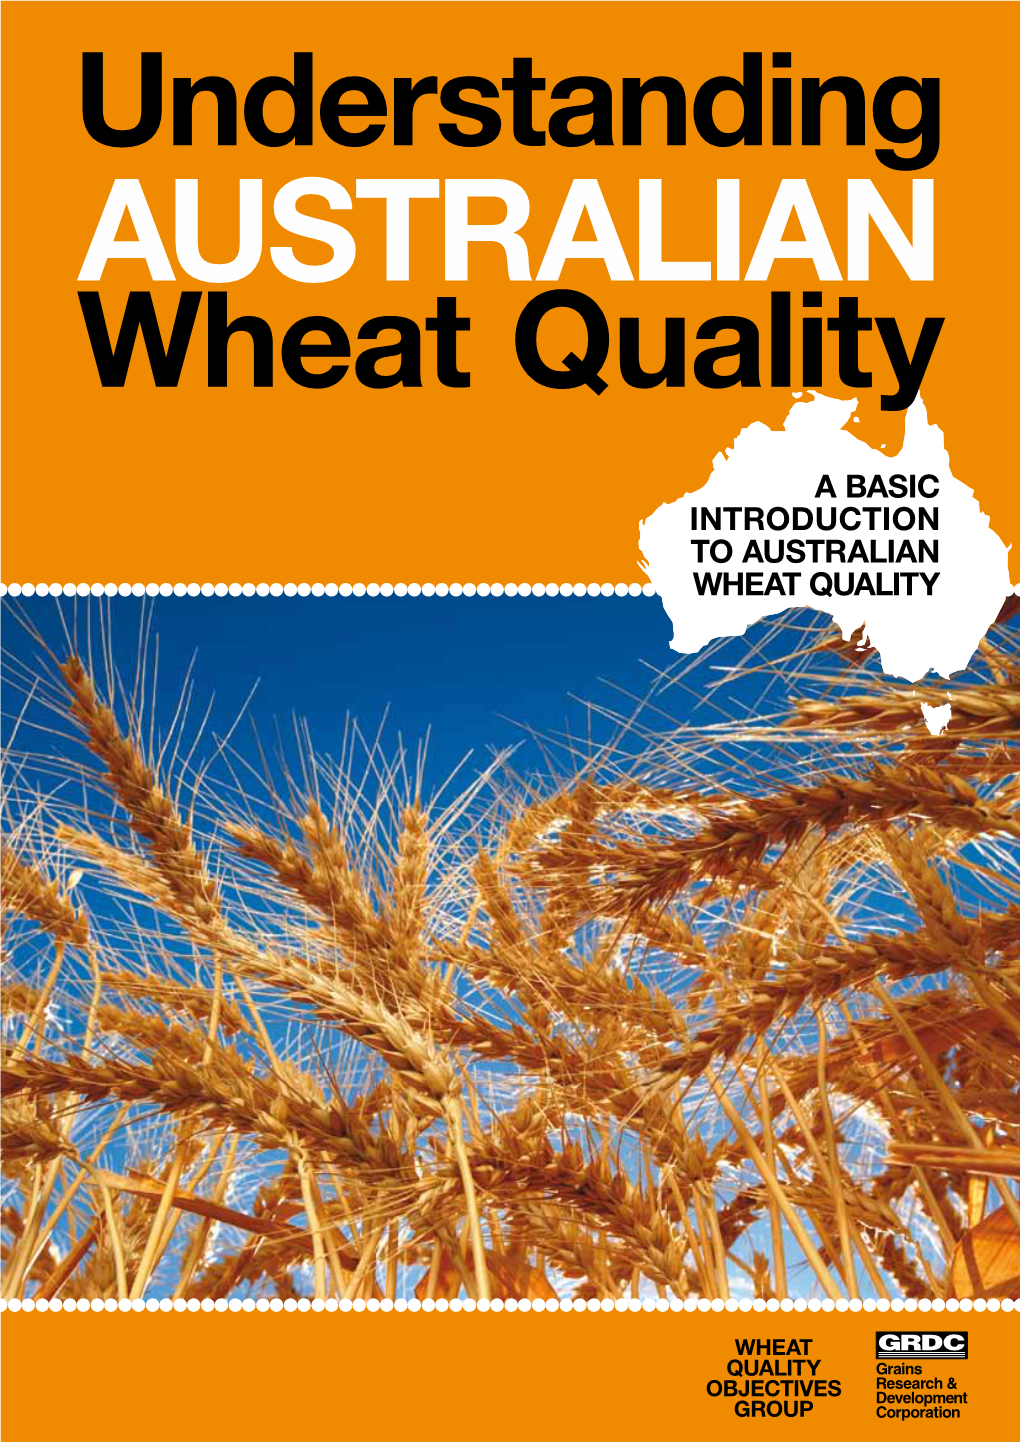 A Basic Introduction to Australian Wheat Quality